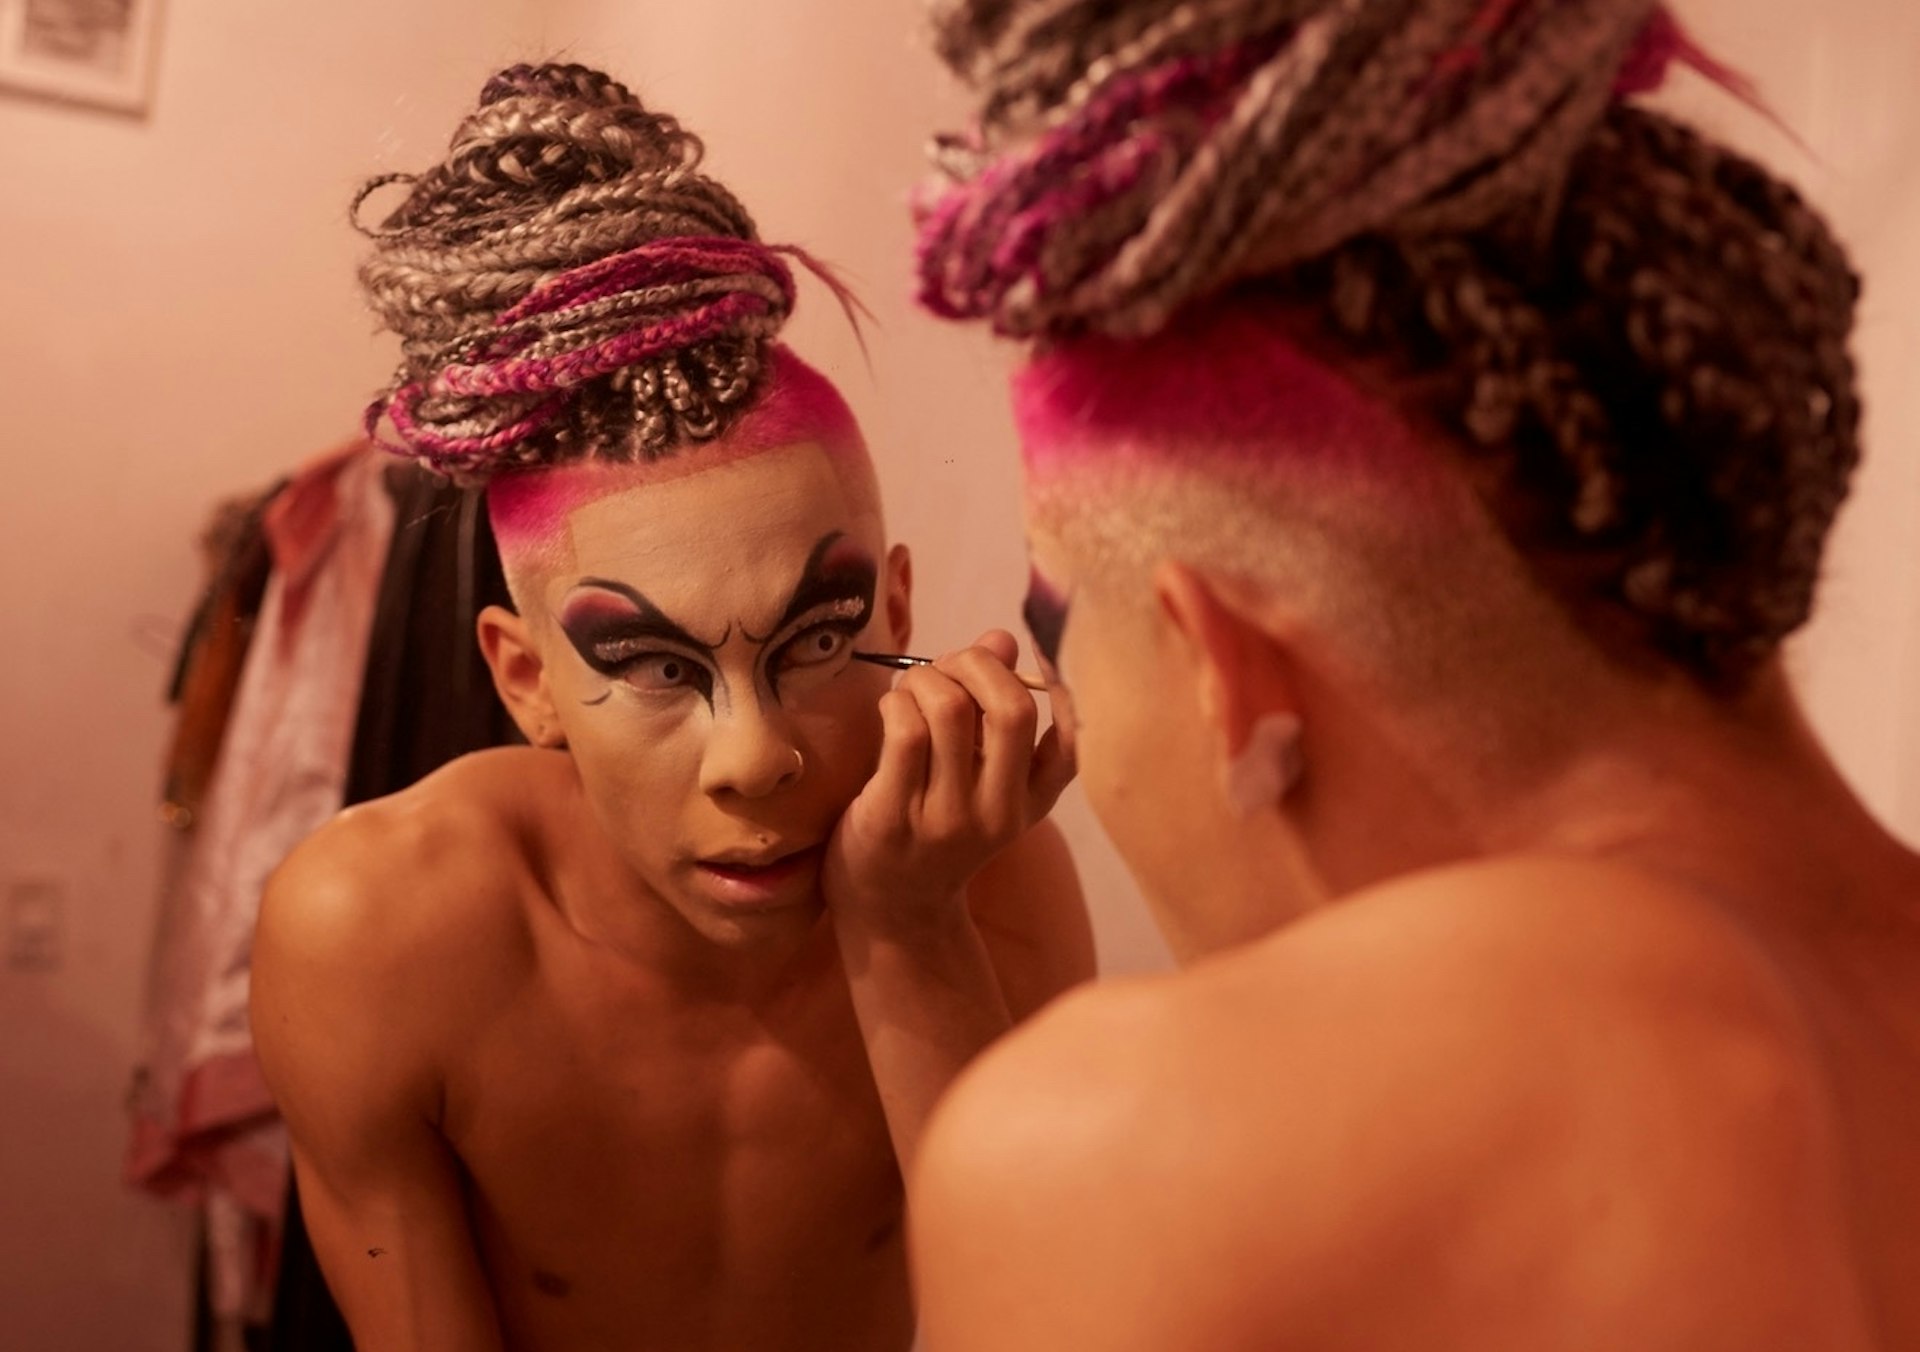 The Caracas drag scene is a refuge for the city’s outsiders